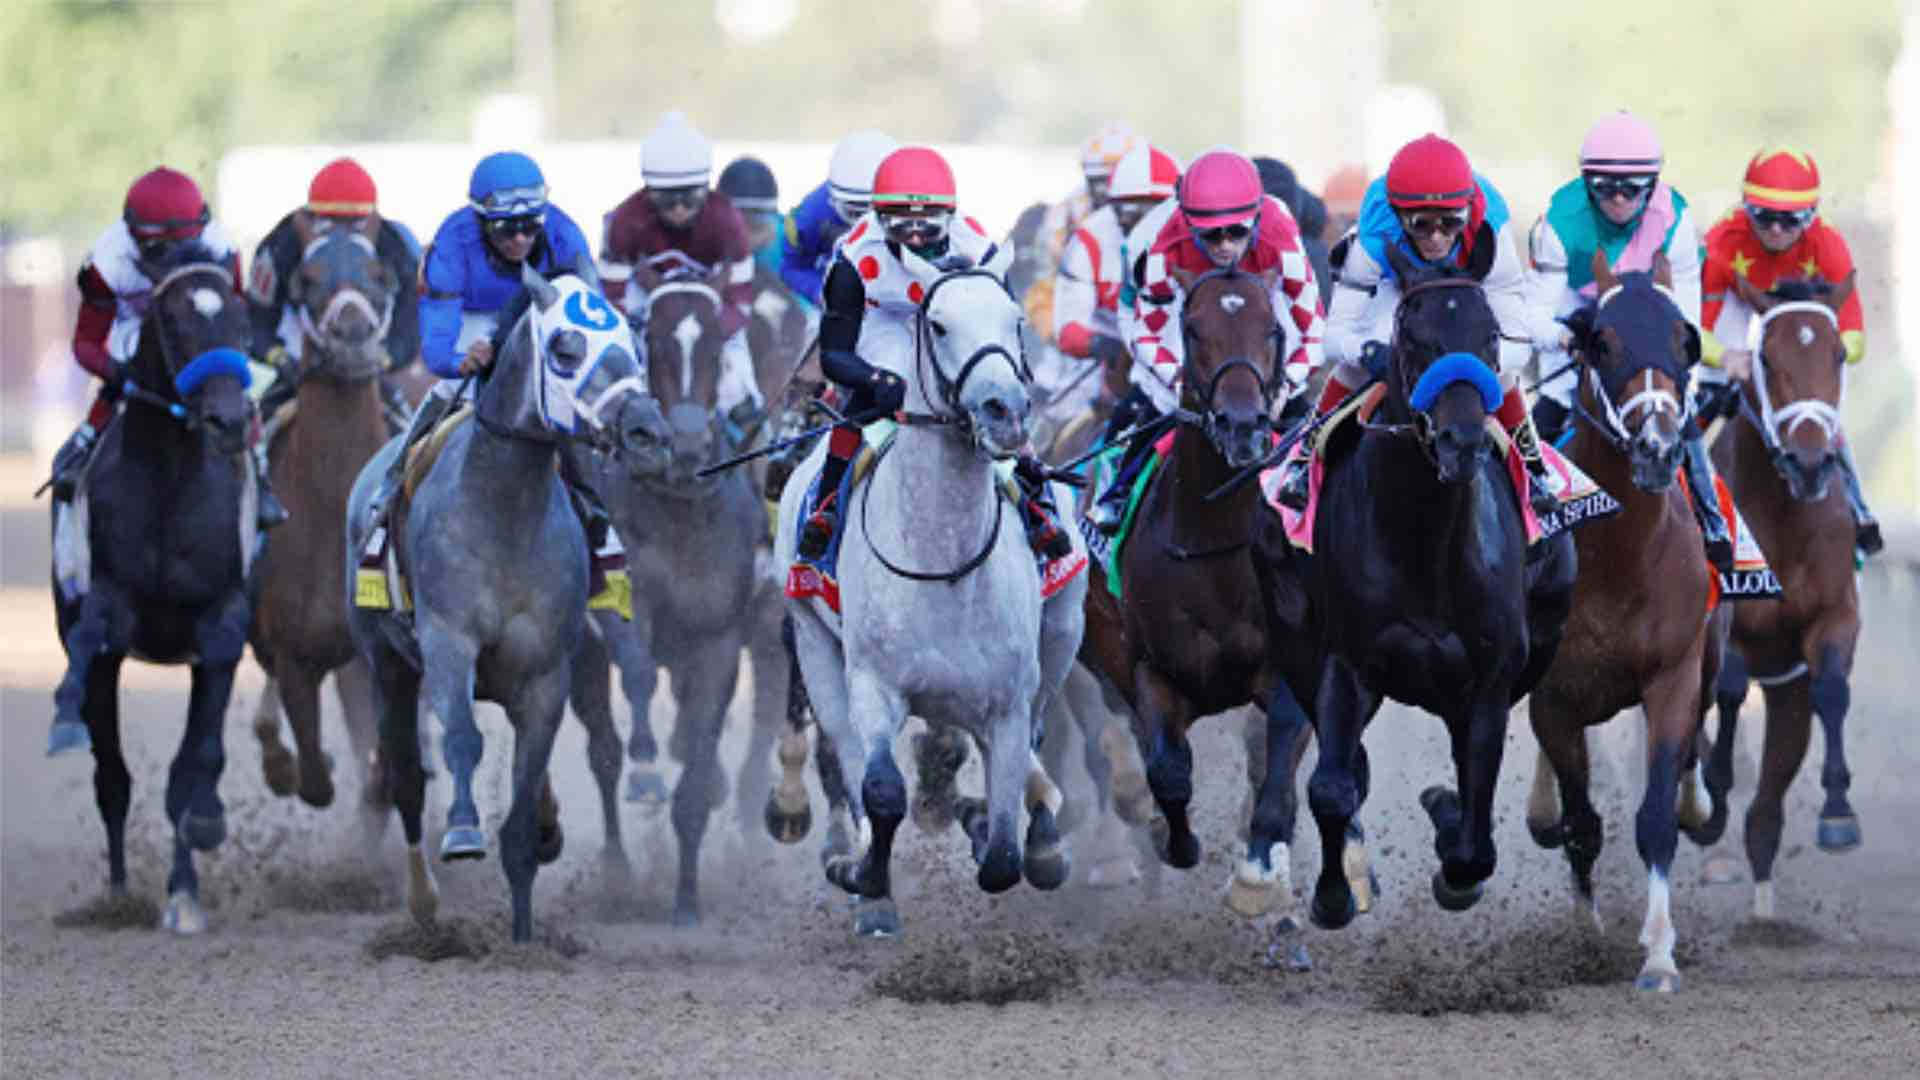 A Group Of Jockeys Are Racing On A Dirt Track